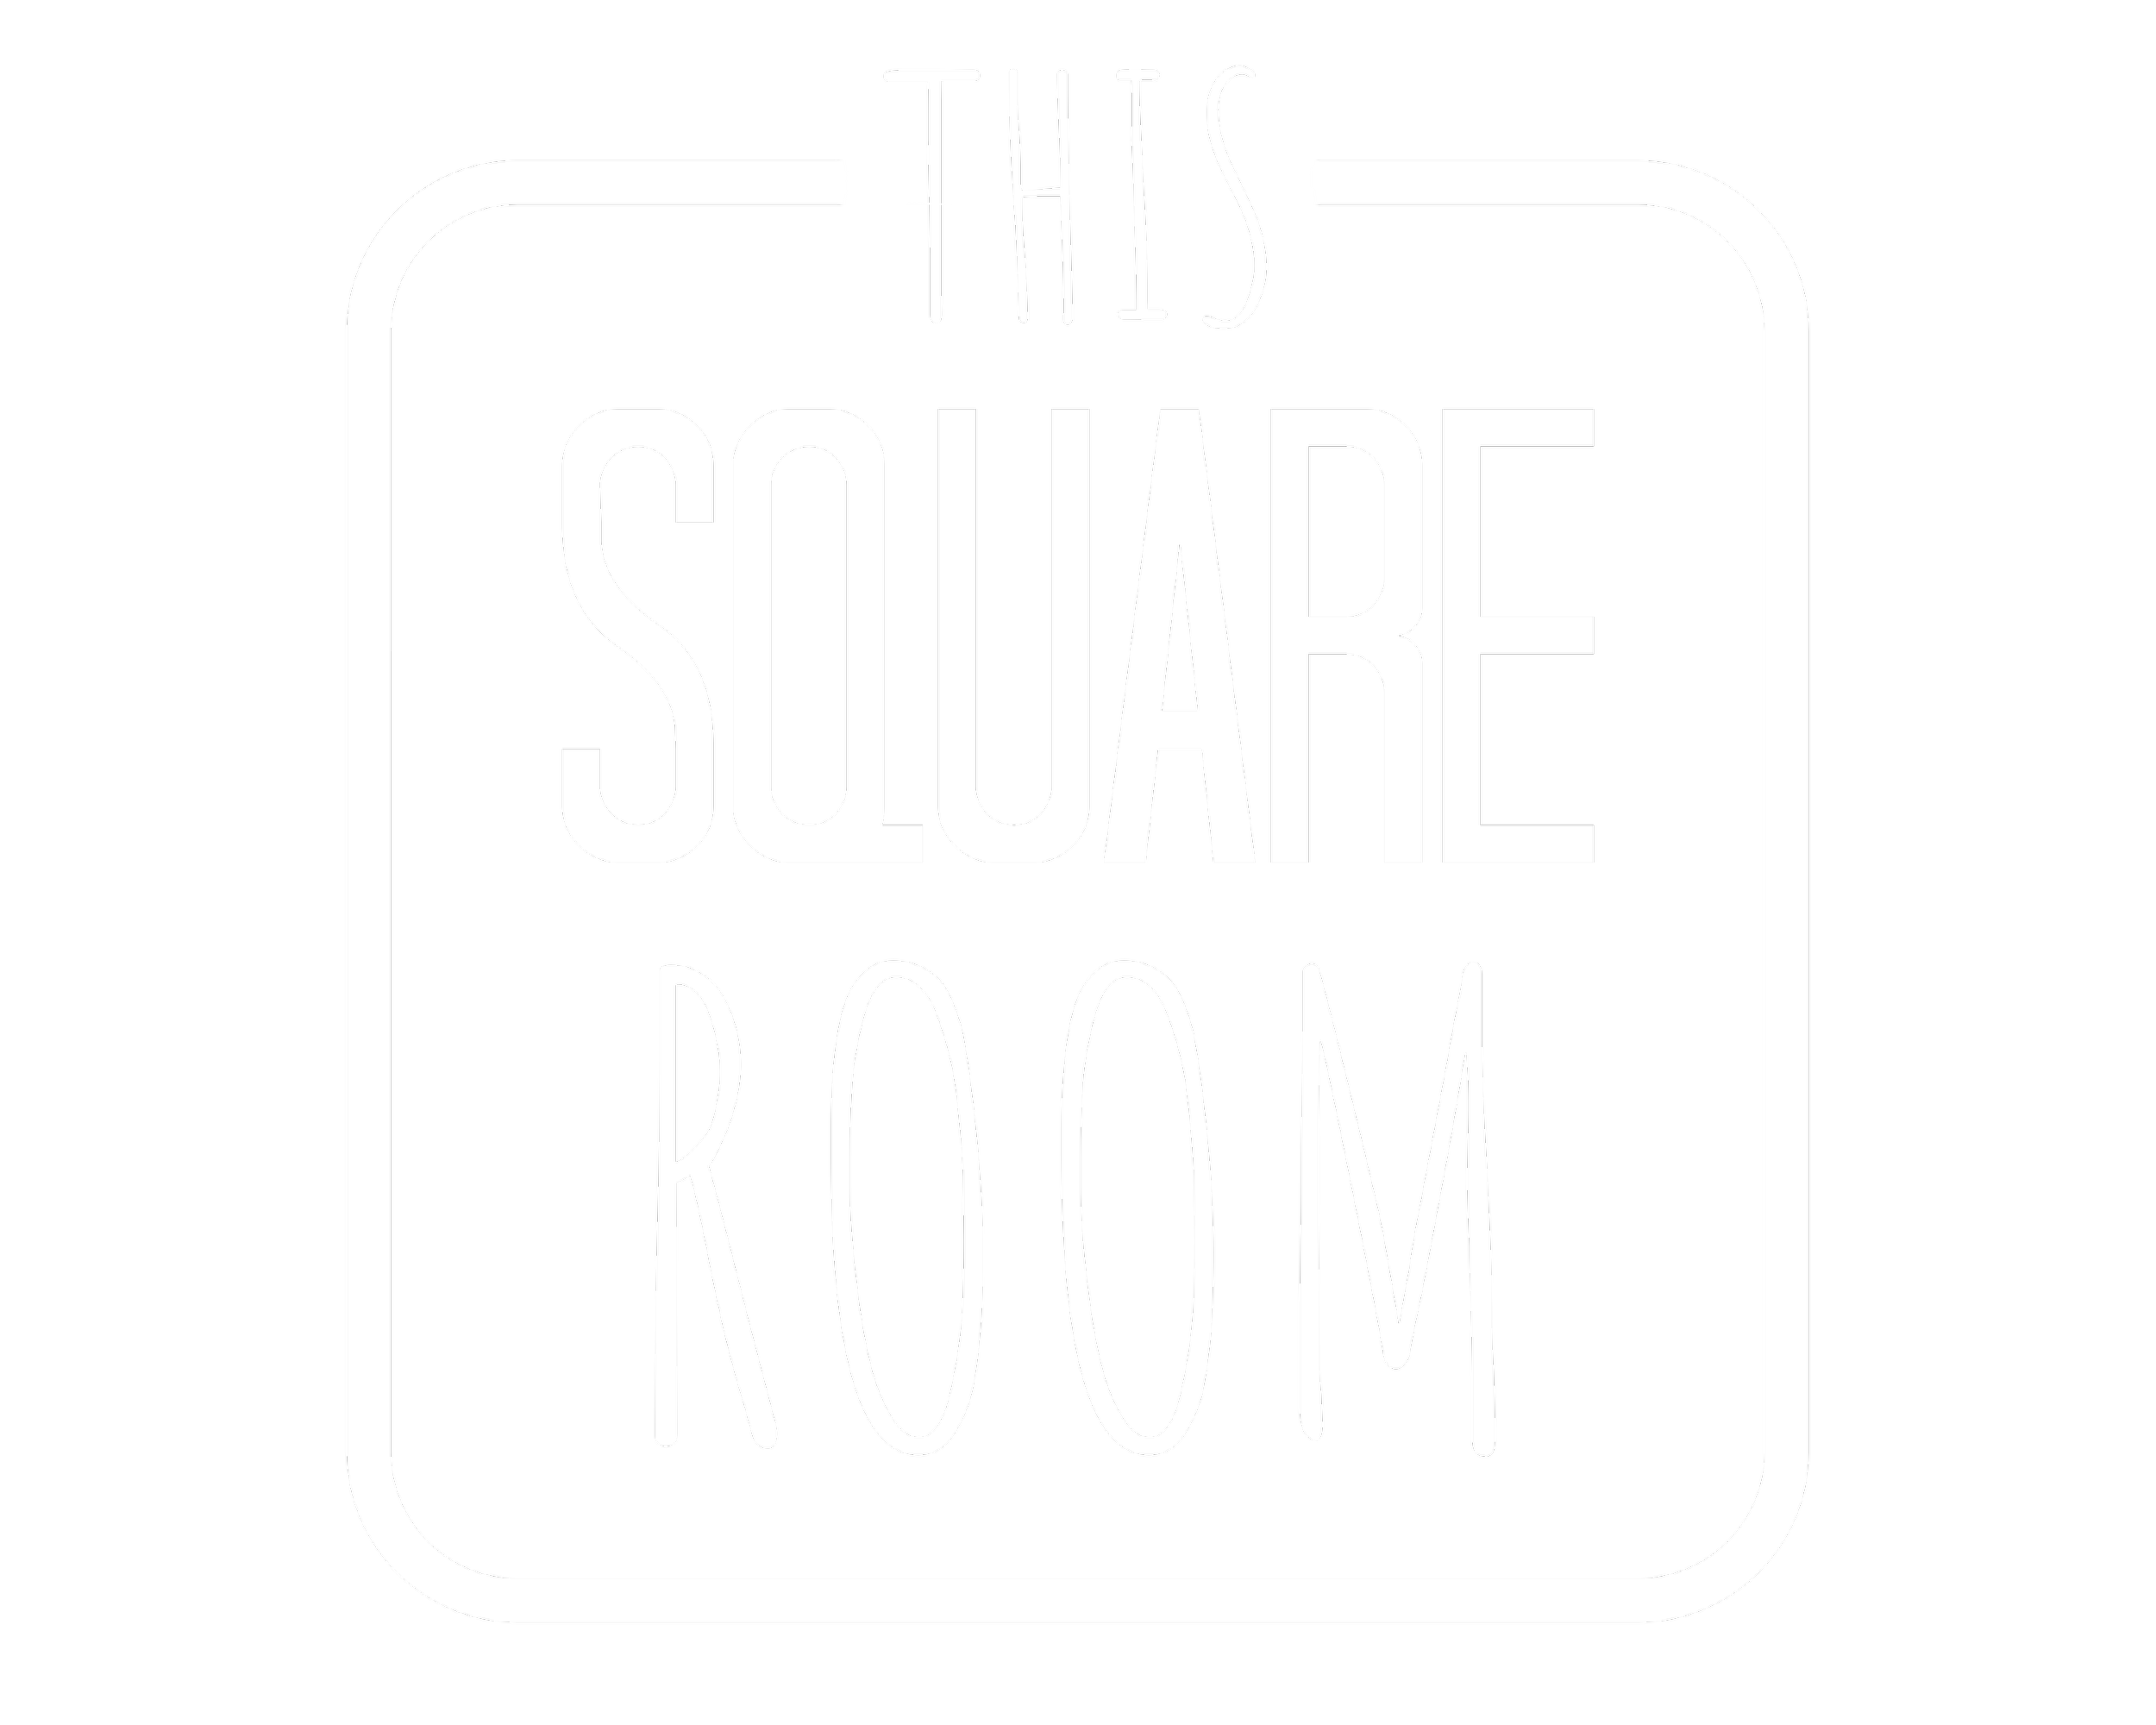 THIS SQUARE ROOM